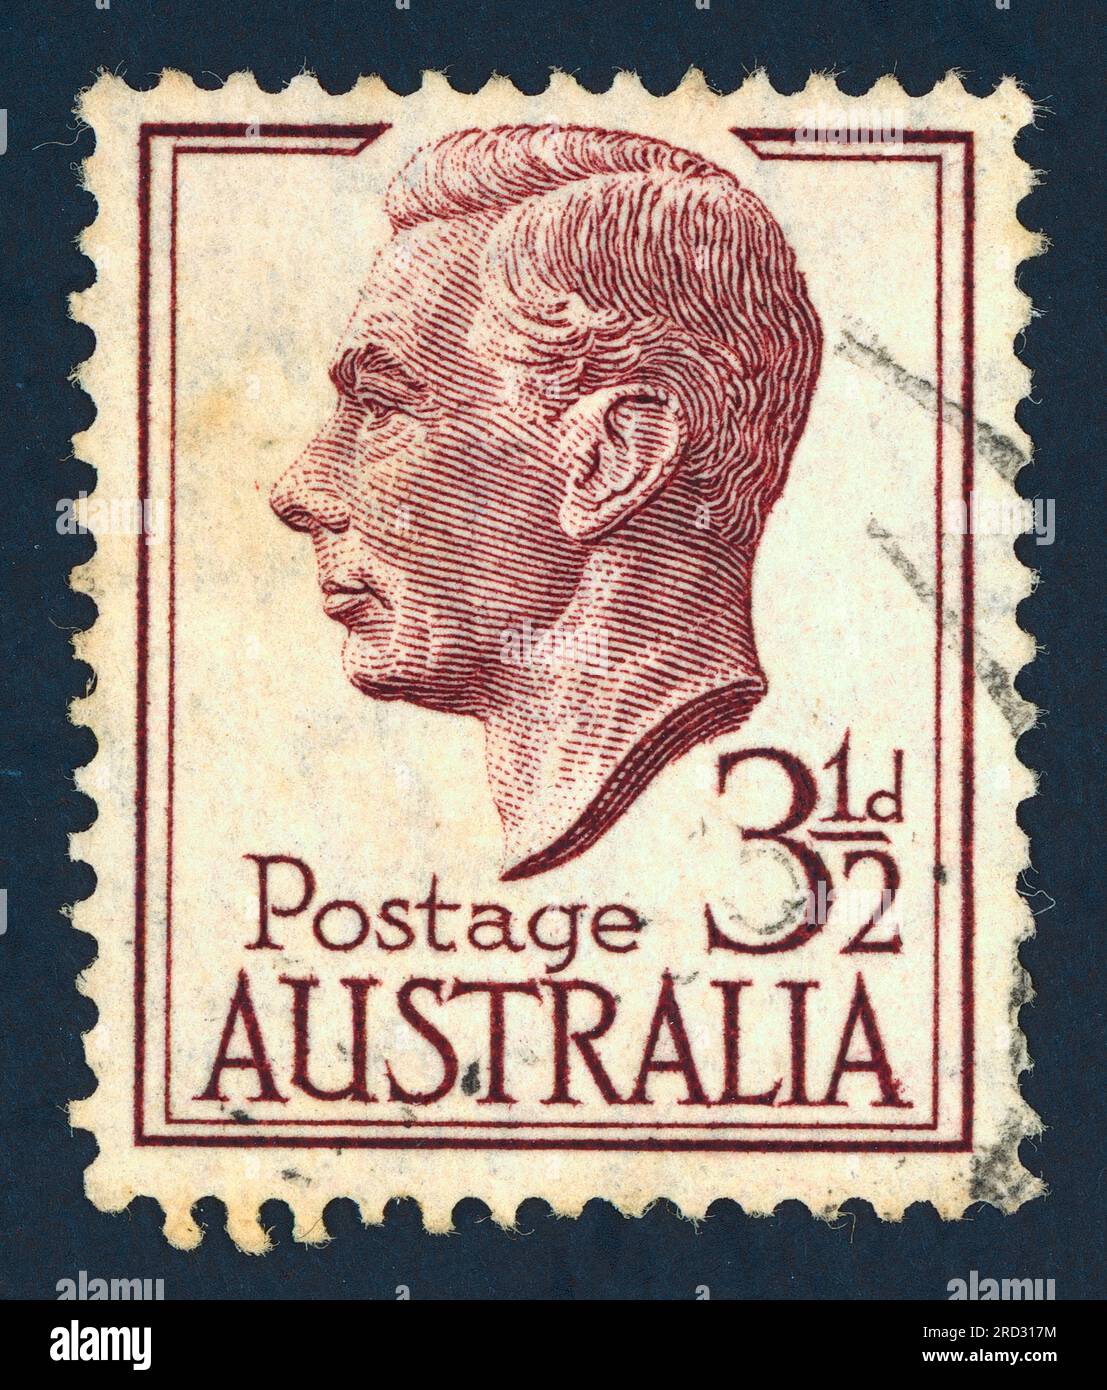 King George VI. Postage stamp issued in Australia. Stock Photo